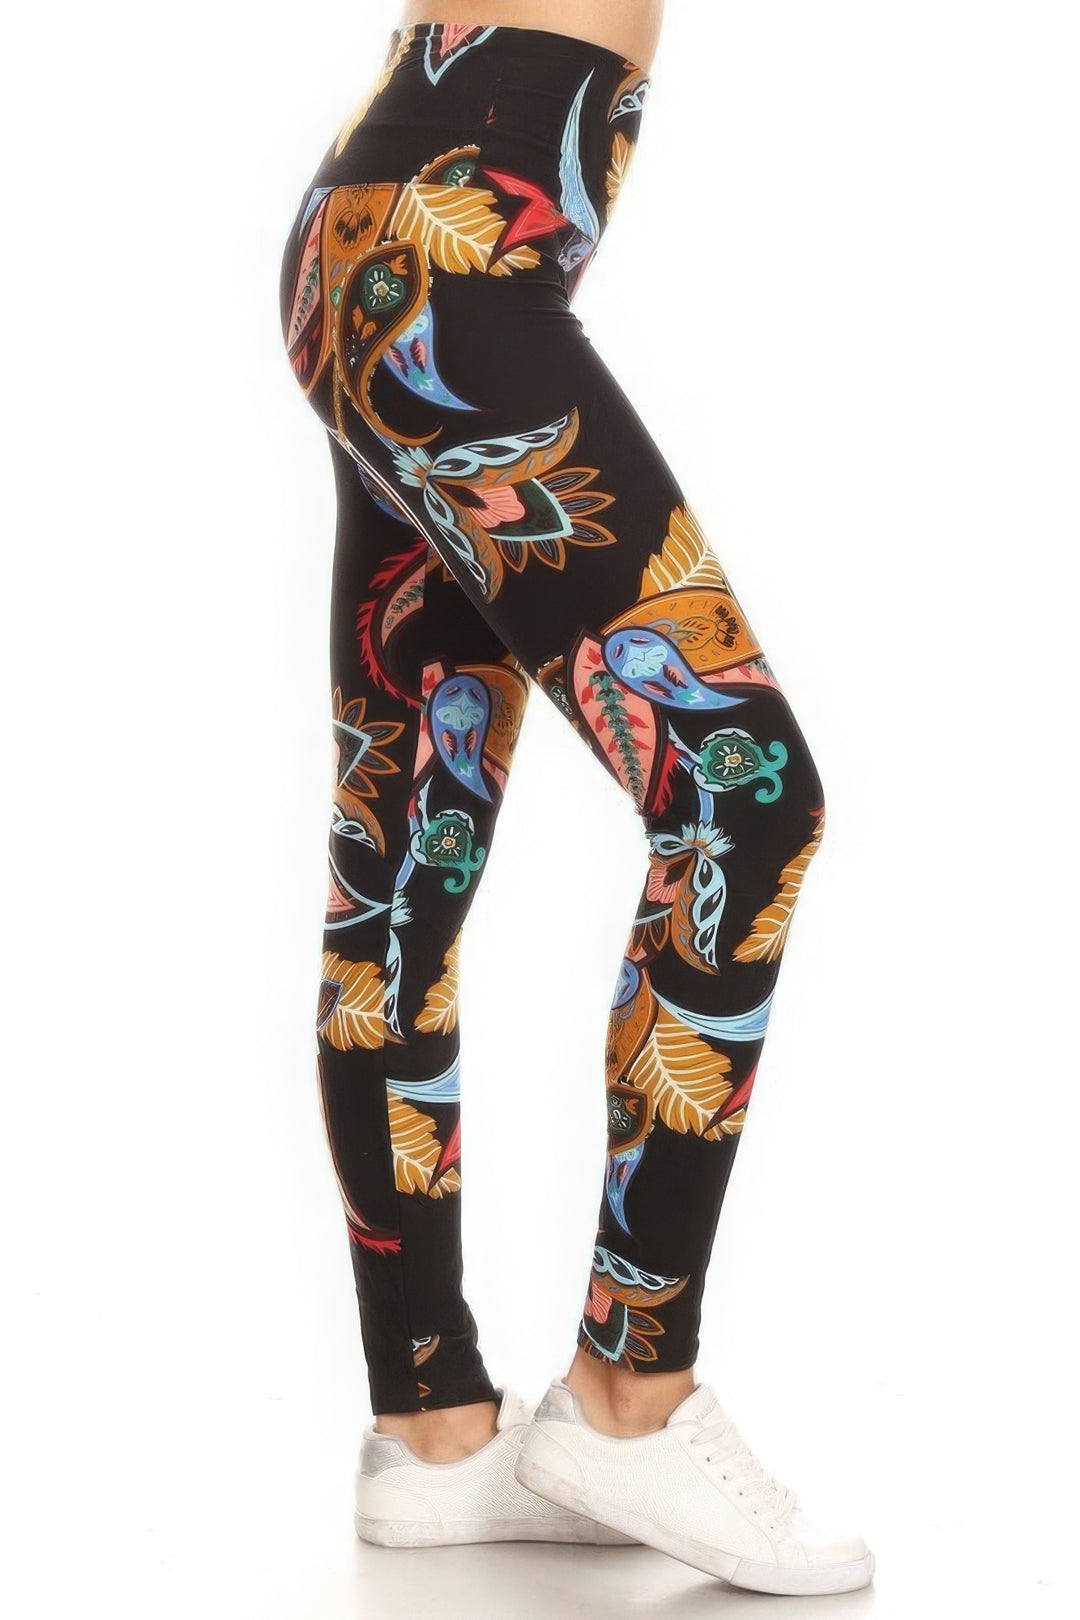 5-inch Long Yoga Style Banded Lined Paisley Floral Printed Knit Legging With High Waist - bertofonsi